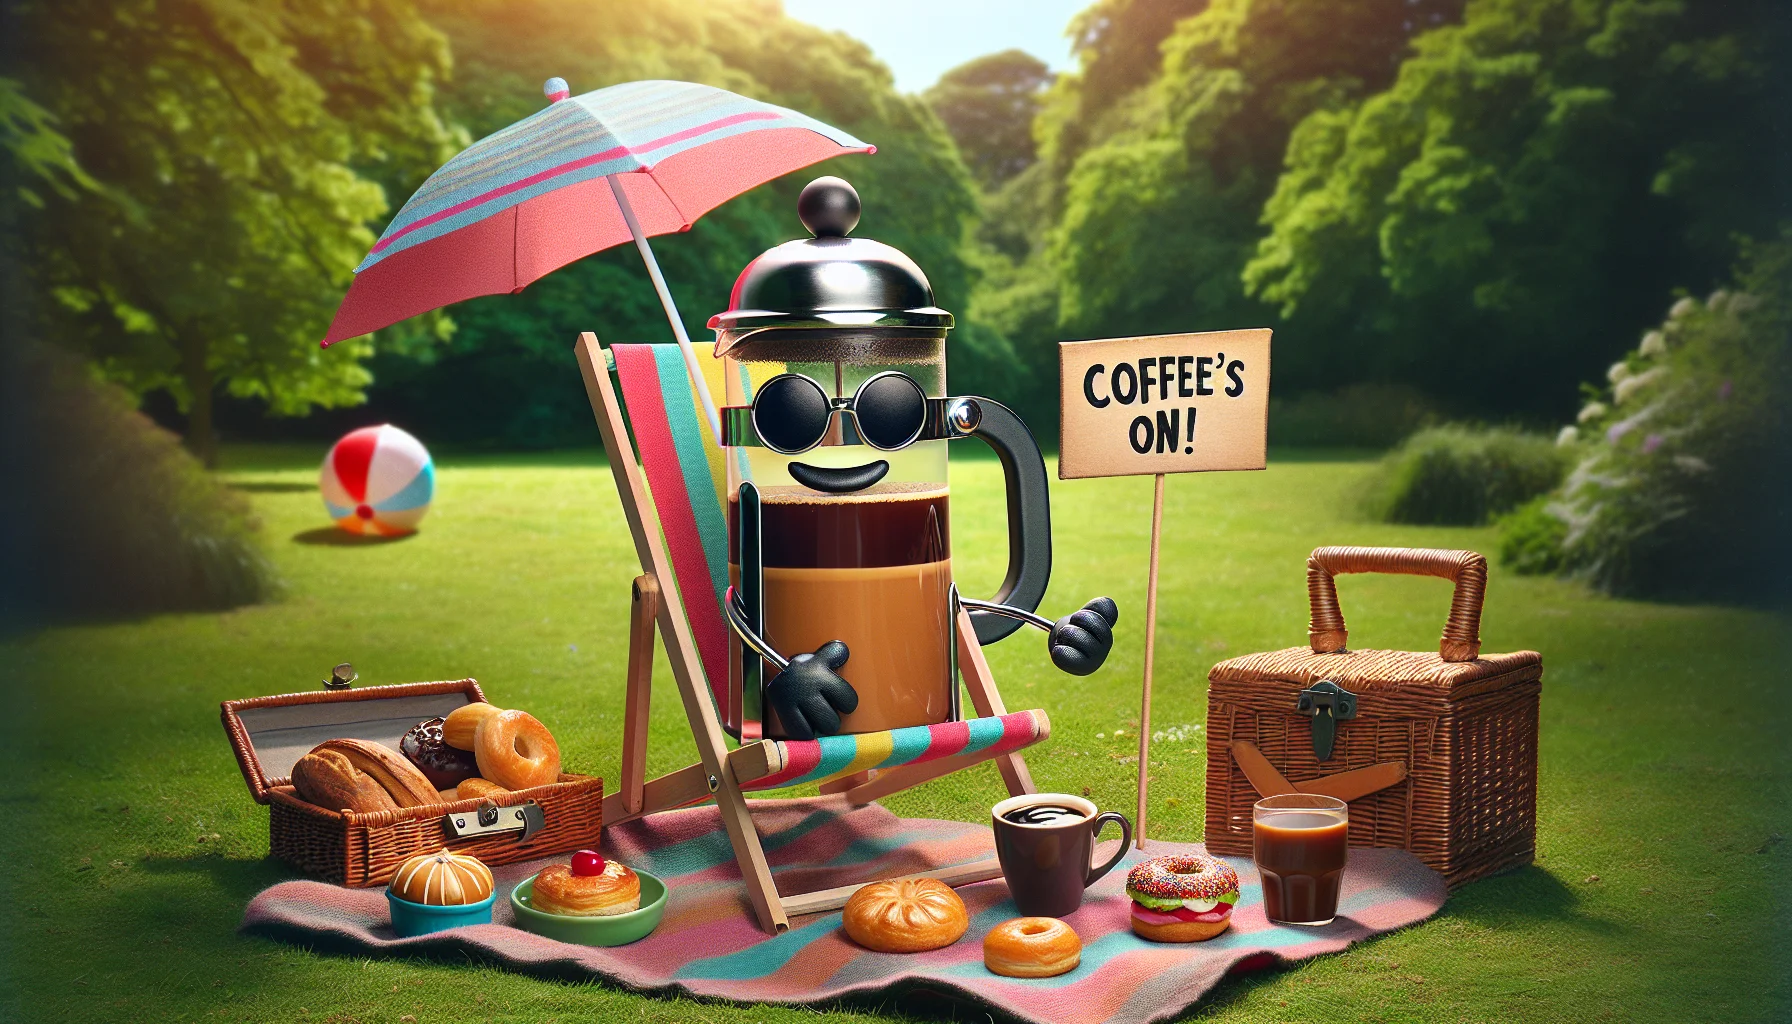 Imagine a classic French press coffee maker enjoying a summer day in a park. It's wearing sunglasses and a sun hat, lounging in a small deck chair with colorful stripes, surrounded by a small picnic blanket with a variety of pastries. A sign is planted in the ground next to it, reading 'Coffee's On!'. The French press waves a little flag that says, 'Join me', with a charming and inviting aura. This surreal and hilarious scene is sure to tickle your funny bone and remind you of the joy of a good coffee.